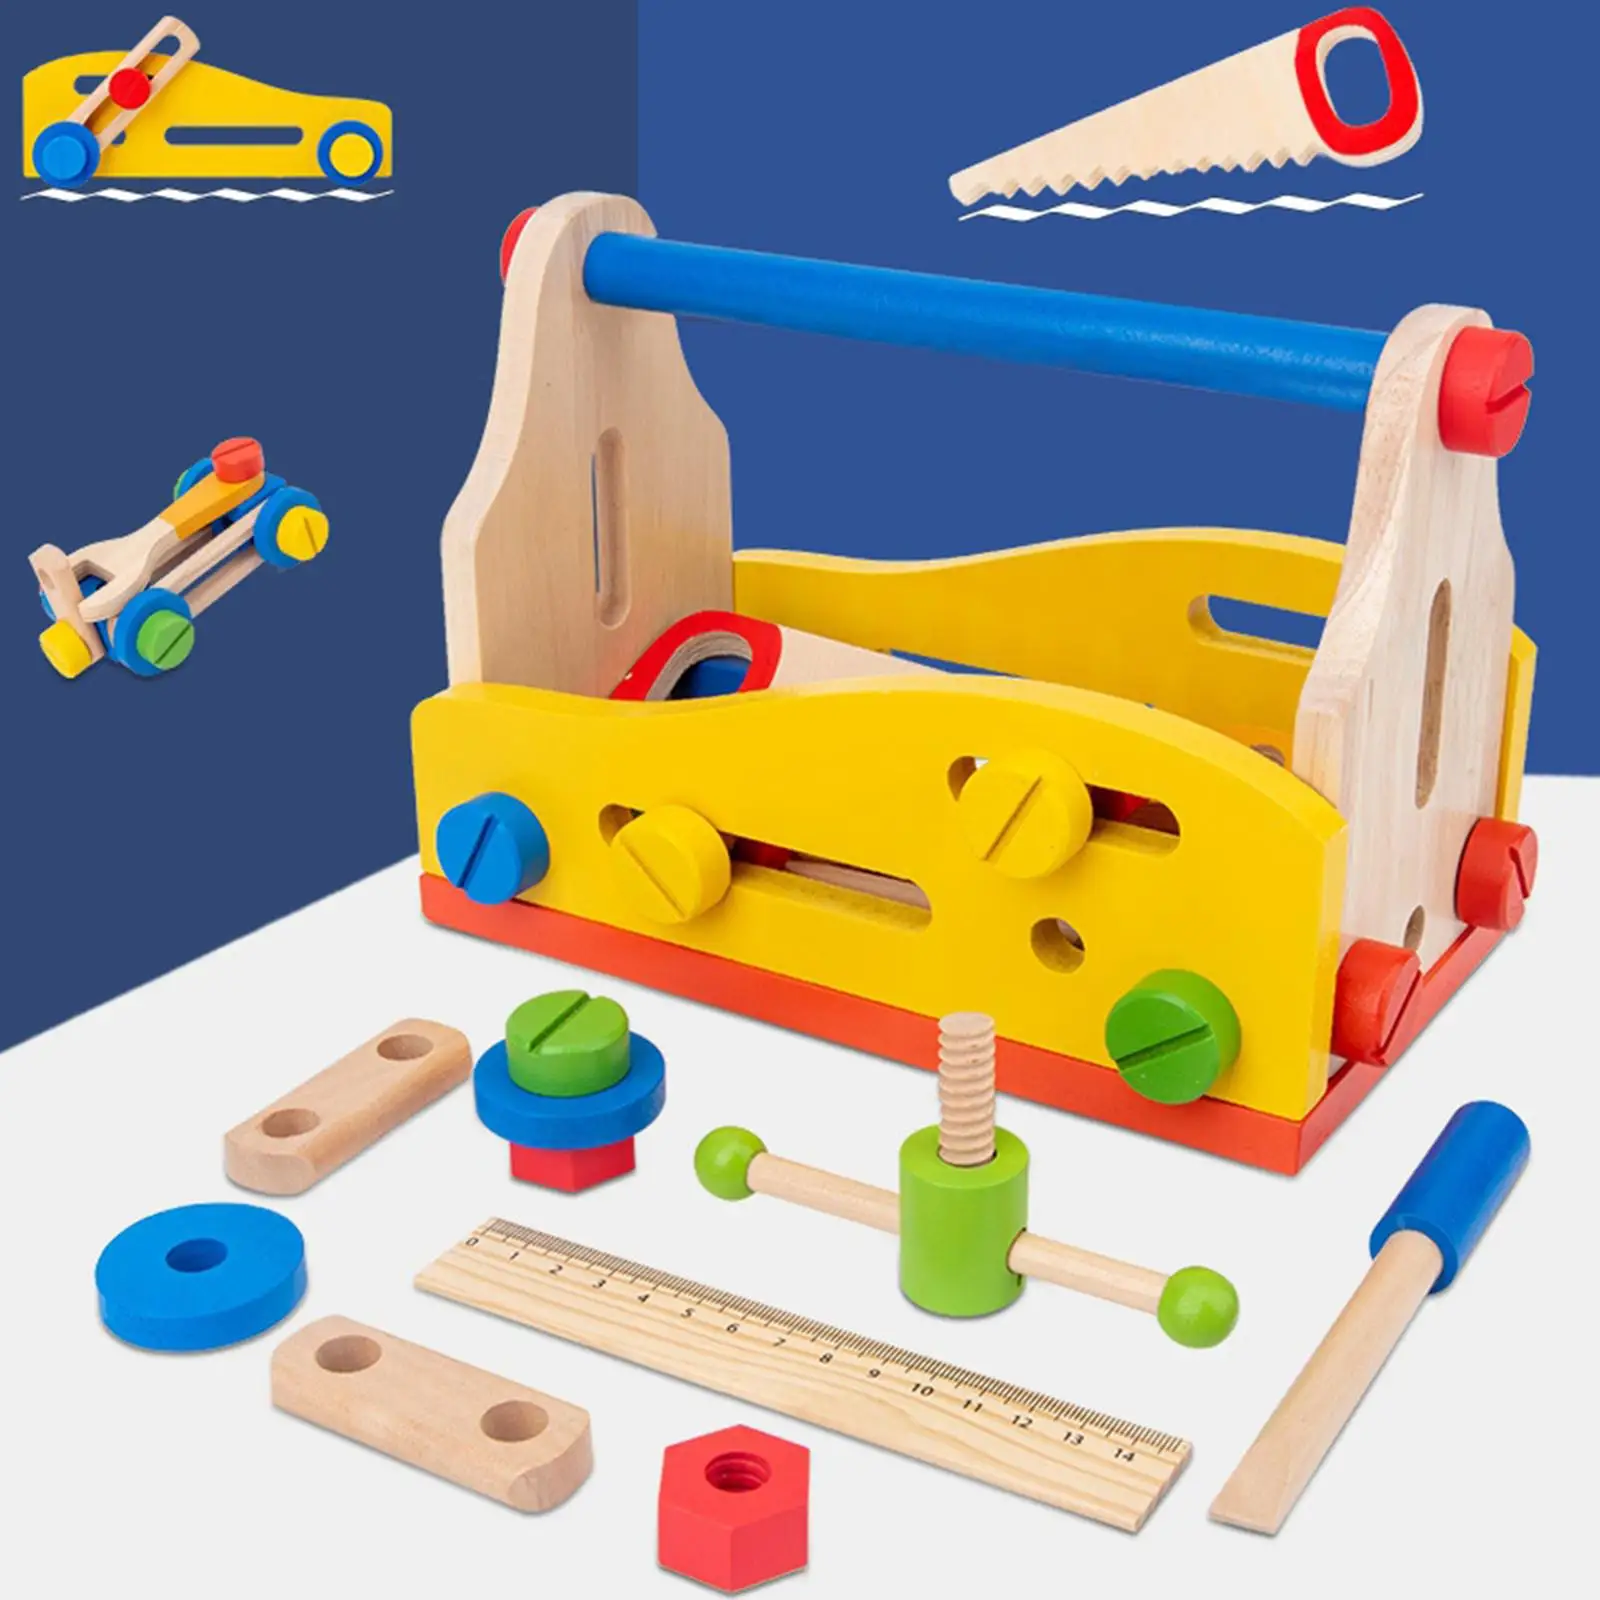 Wooden Tool Toy Preschool Learning Activities Play Tool Screw Disassembly Toy Construction Toy for Preschool Kids